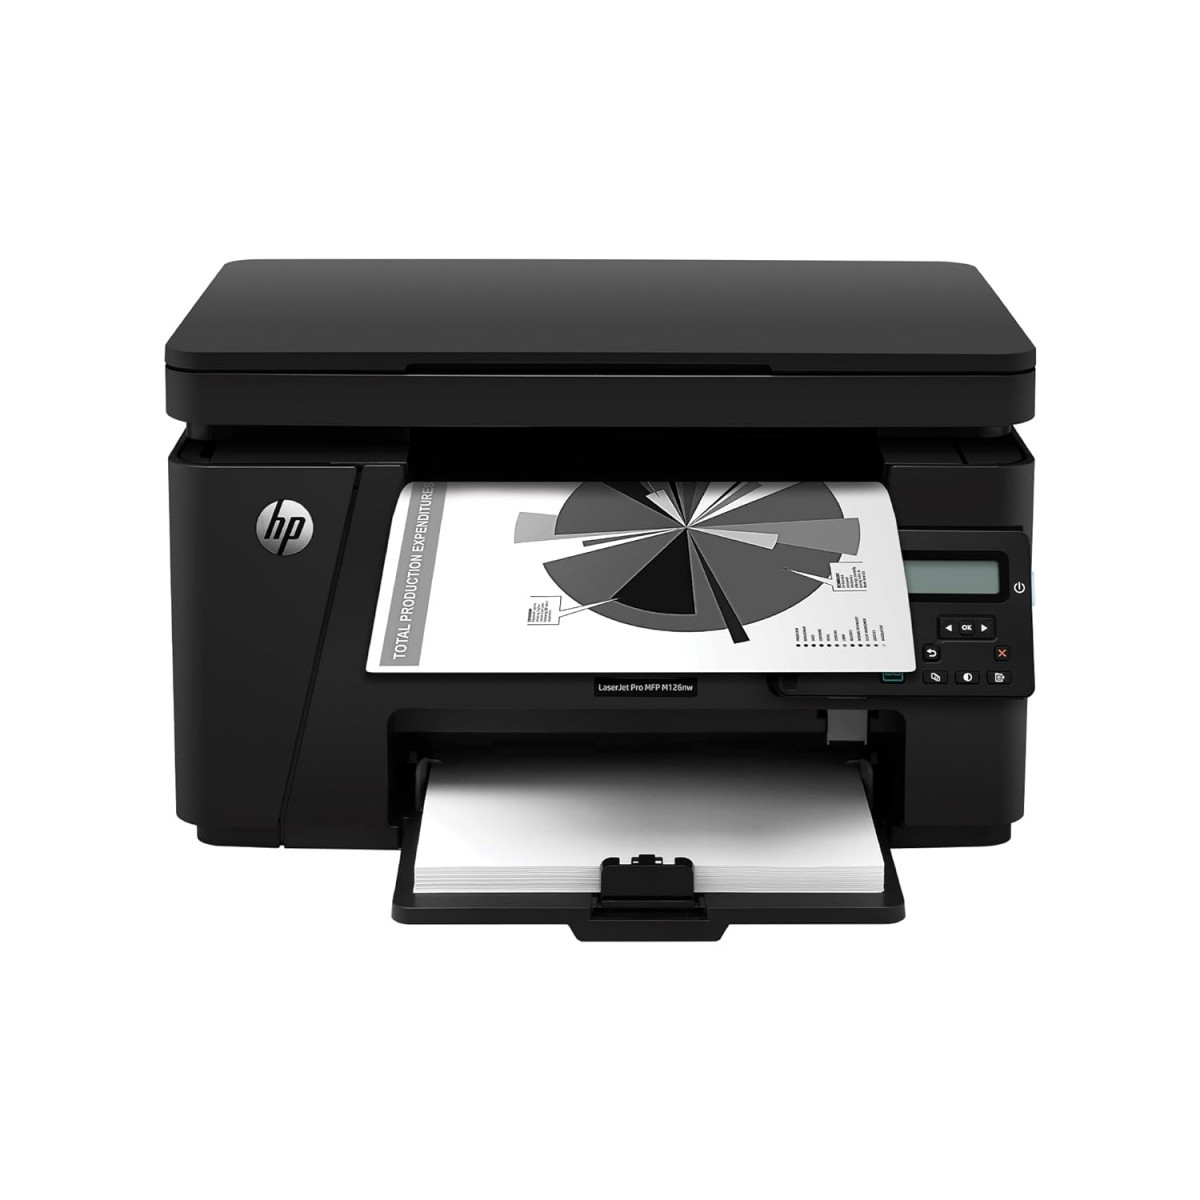 HP Laserjet Pro M126nw All-in-One B&W Printer for Home: Print, Copy, & Scan, Affordable, Compact, Easy Mobile Printing